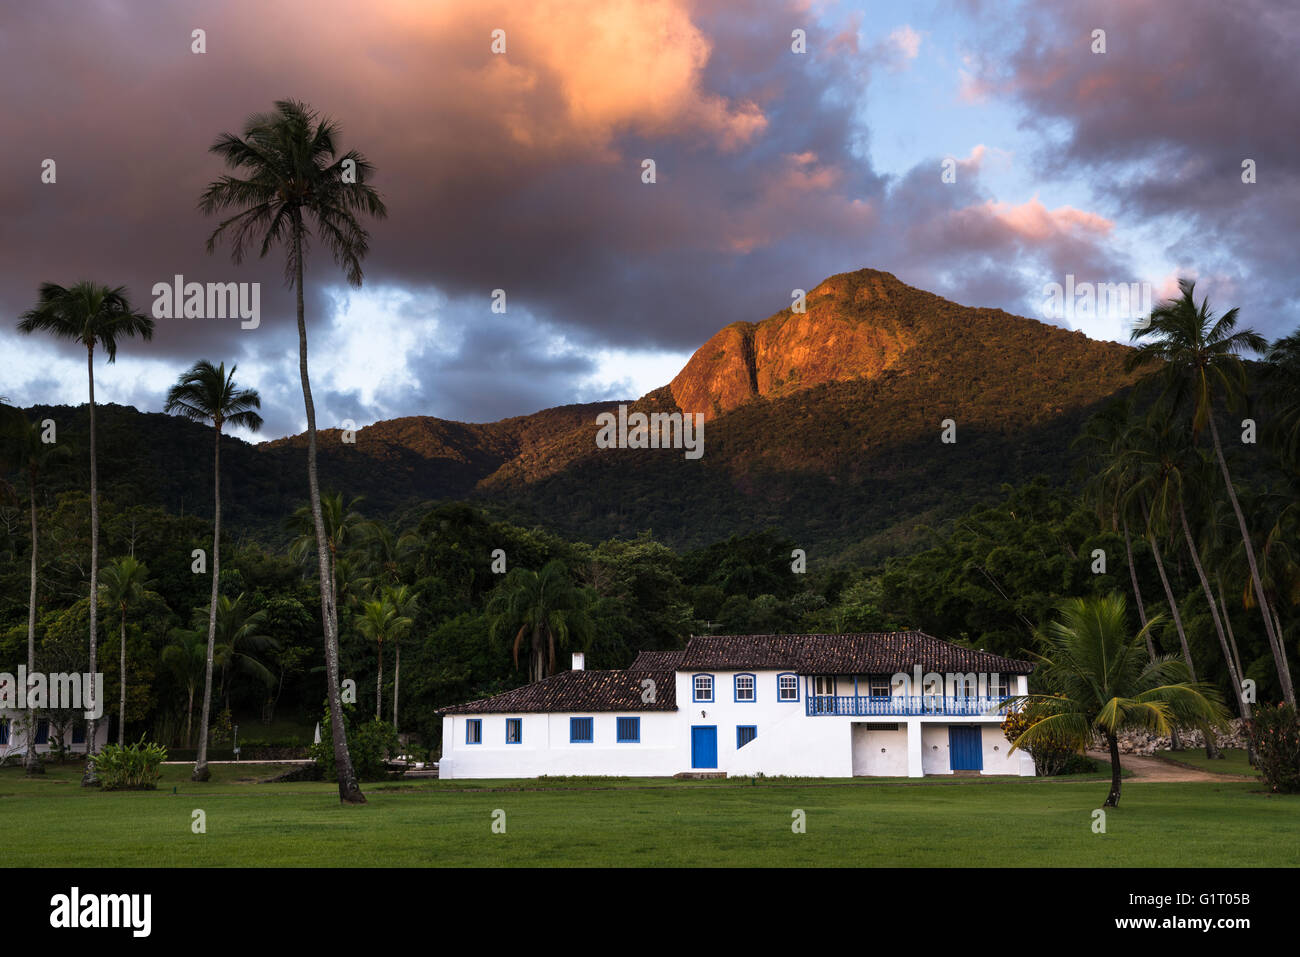 Hystorical farm Engenho d'água, located in Ilhabela, SE Brazil. In the background is the Baepi Mountain. Stock Photo